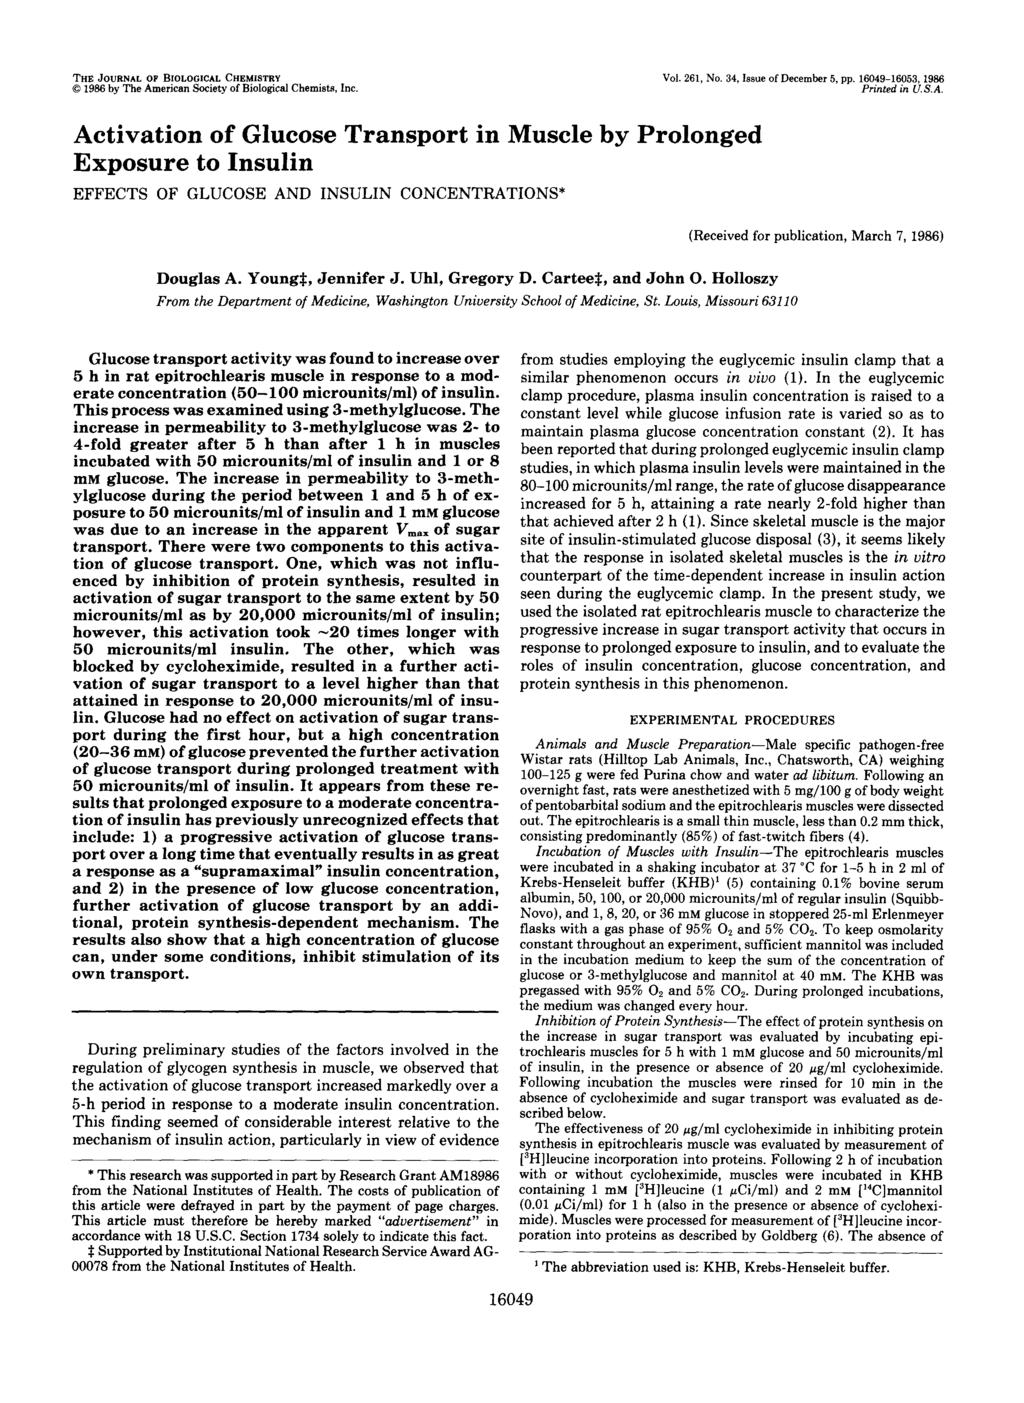 THE JOURNAL OF BOLOGCAL CHEMSTRY 0 1986 hy The American Society of Biological Chemists, nc. Vol. 261, No. 34, ssue of December 5, pp. 16049-16053, 1986 Printed in U.S.A. Activation of Glucose Transport in Muscle by Prolonged Exposure to nsulin EFFECTS OF GLUCOSE AND NSULN CONCENTRATONS* (Received for publication, March 7, 1986) Douglas A.